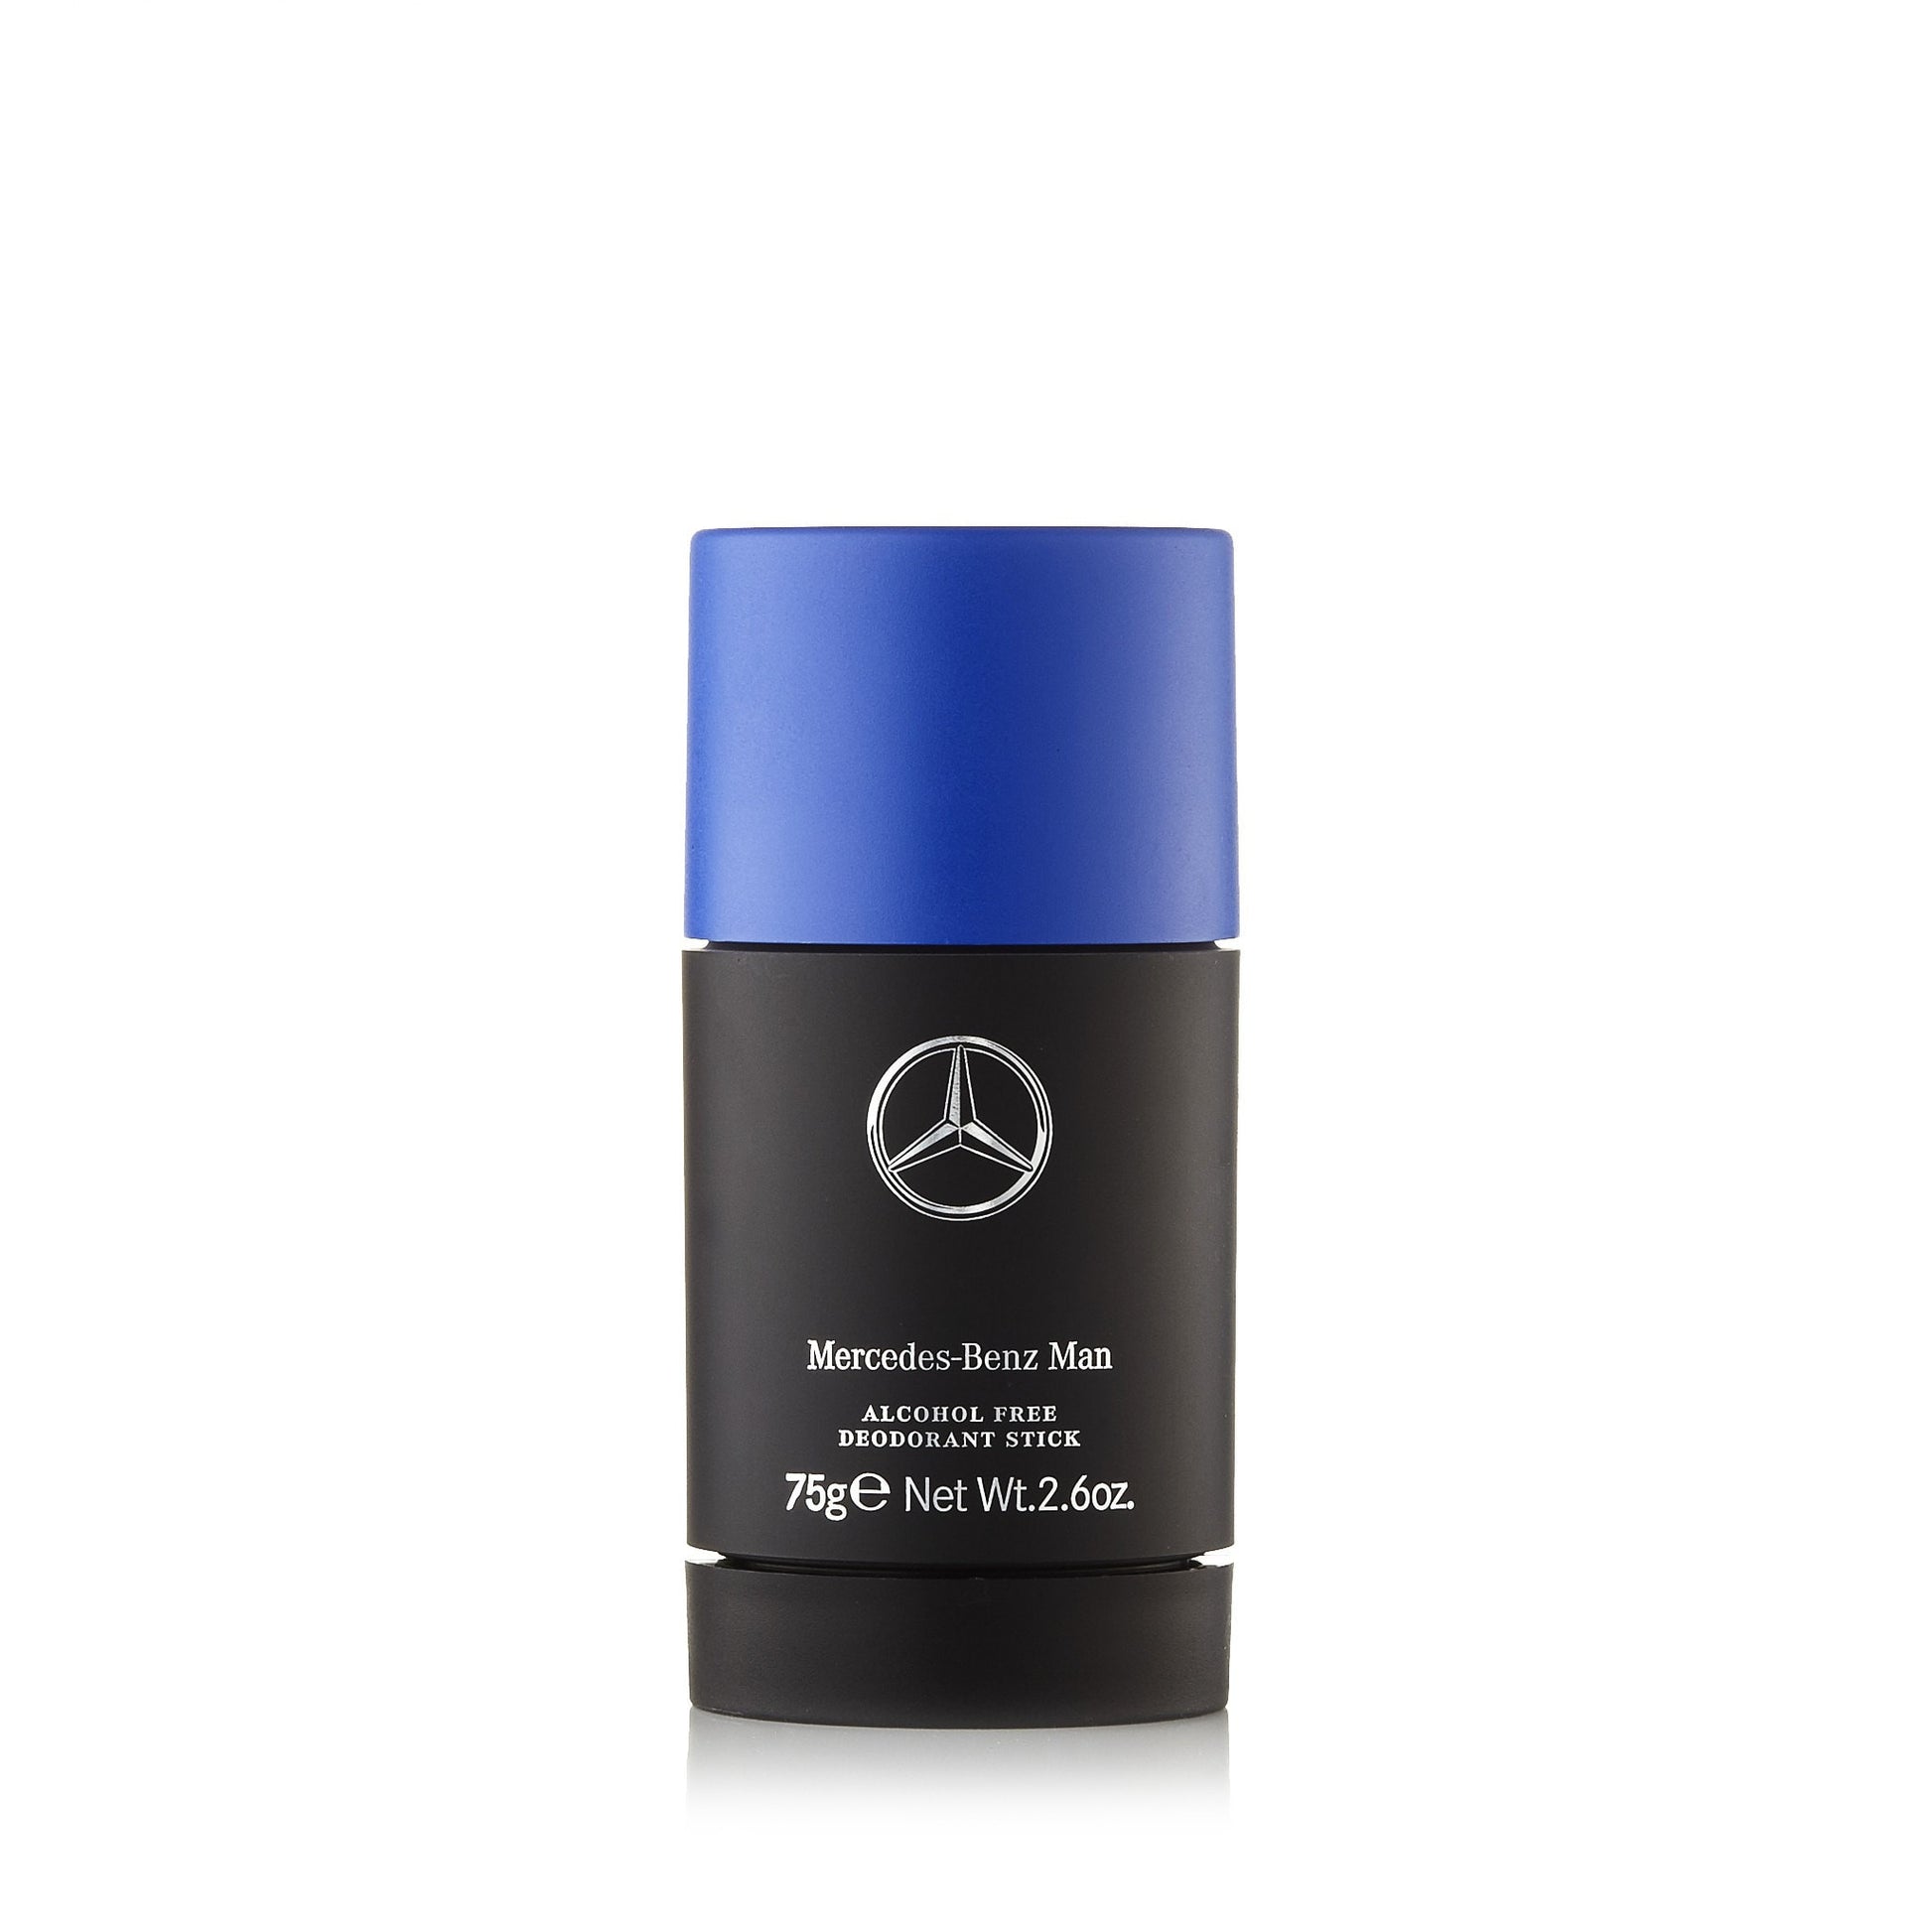 Mercedes-Benz Man Deodorant for Men by Mercedes-Benz, Product image 1